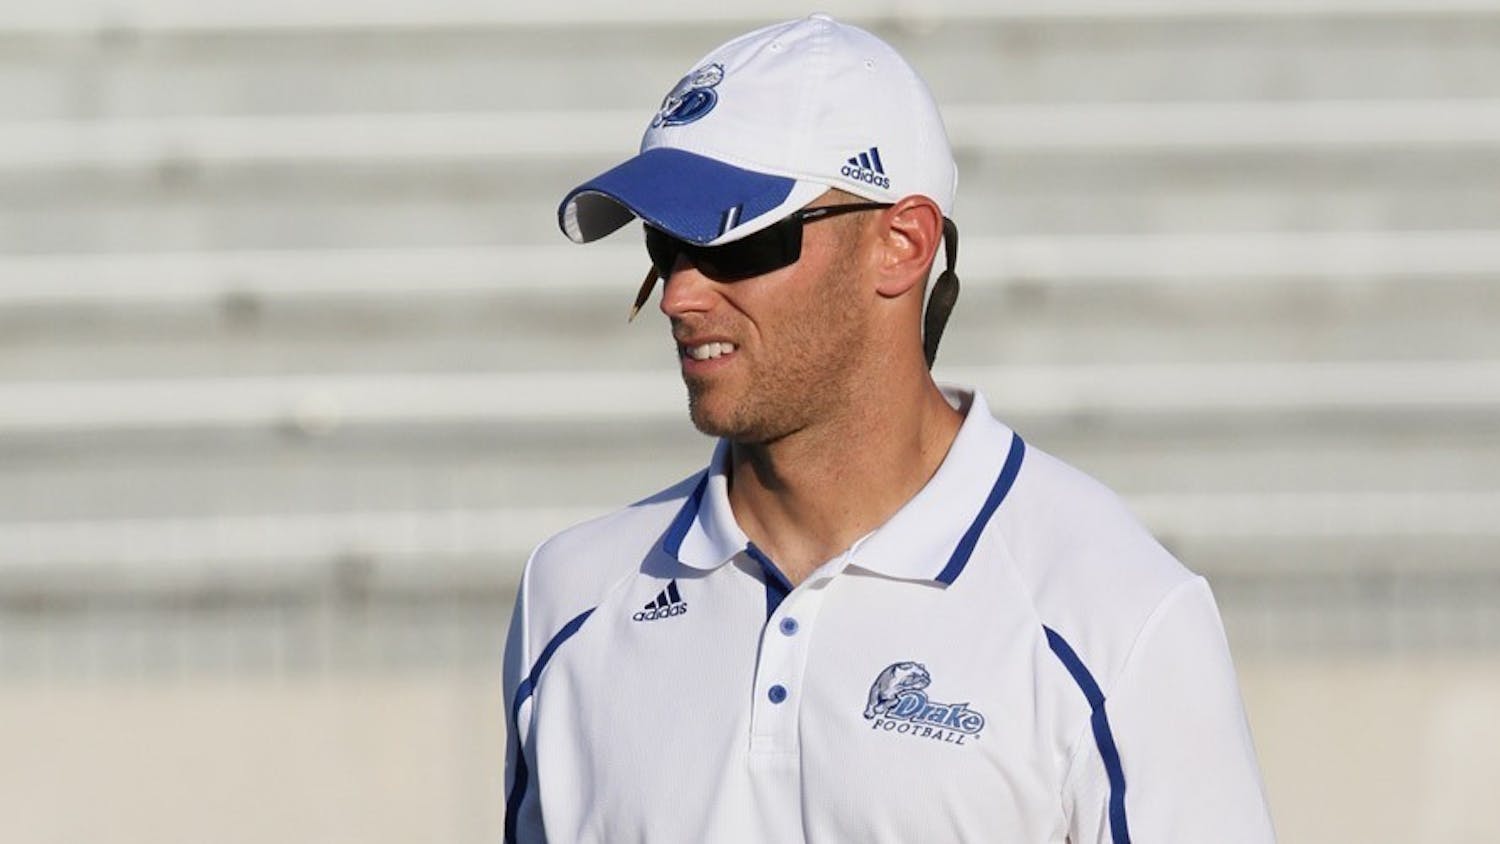 	Eastern Michigan University hired Todd Frakes to be secondary coach. He previously held the roles of defensive backs coach and recruiting coordinator at Drake University, under Chris Creighton.